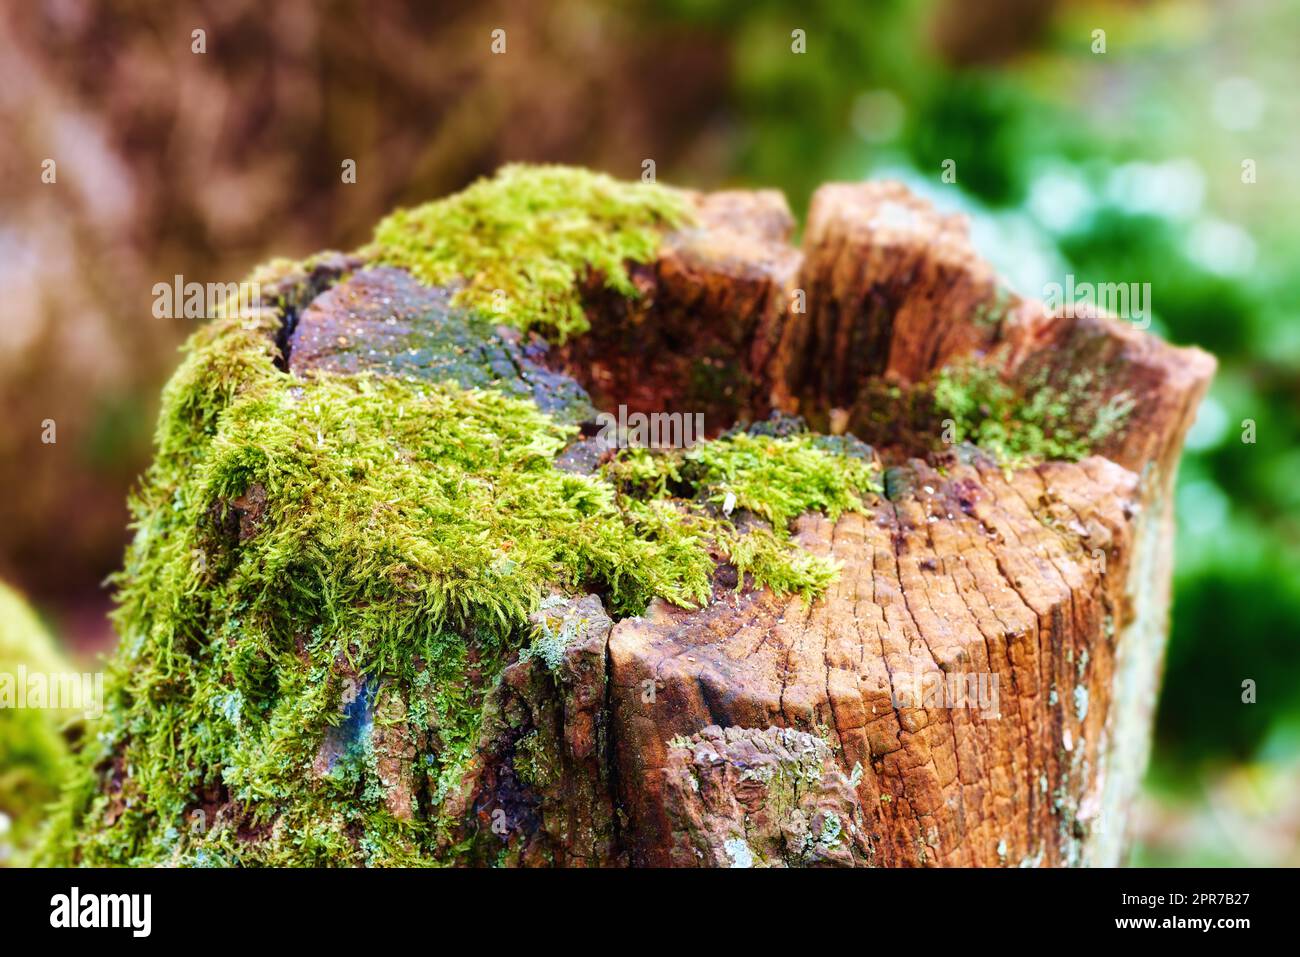 Closeup of an old, mossy oak trunk in a secluded forest. Chopped down tree stump signifying deforestation and tree felling. Macro details of wood and bark in the wilderness for a nature background Stock Photo